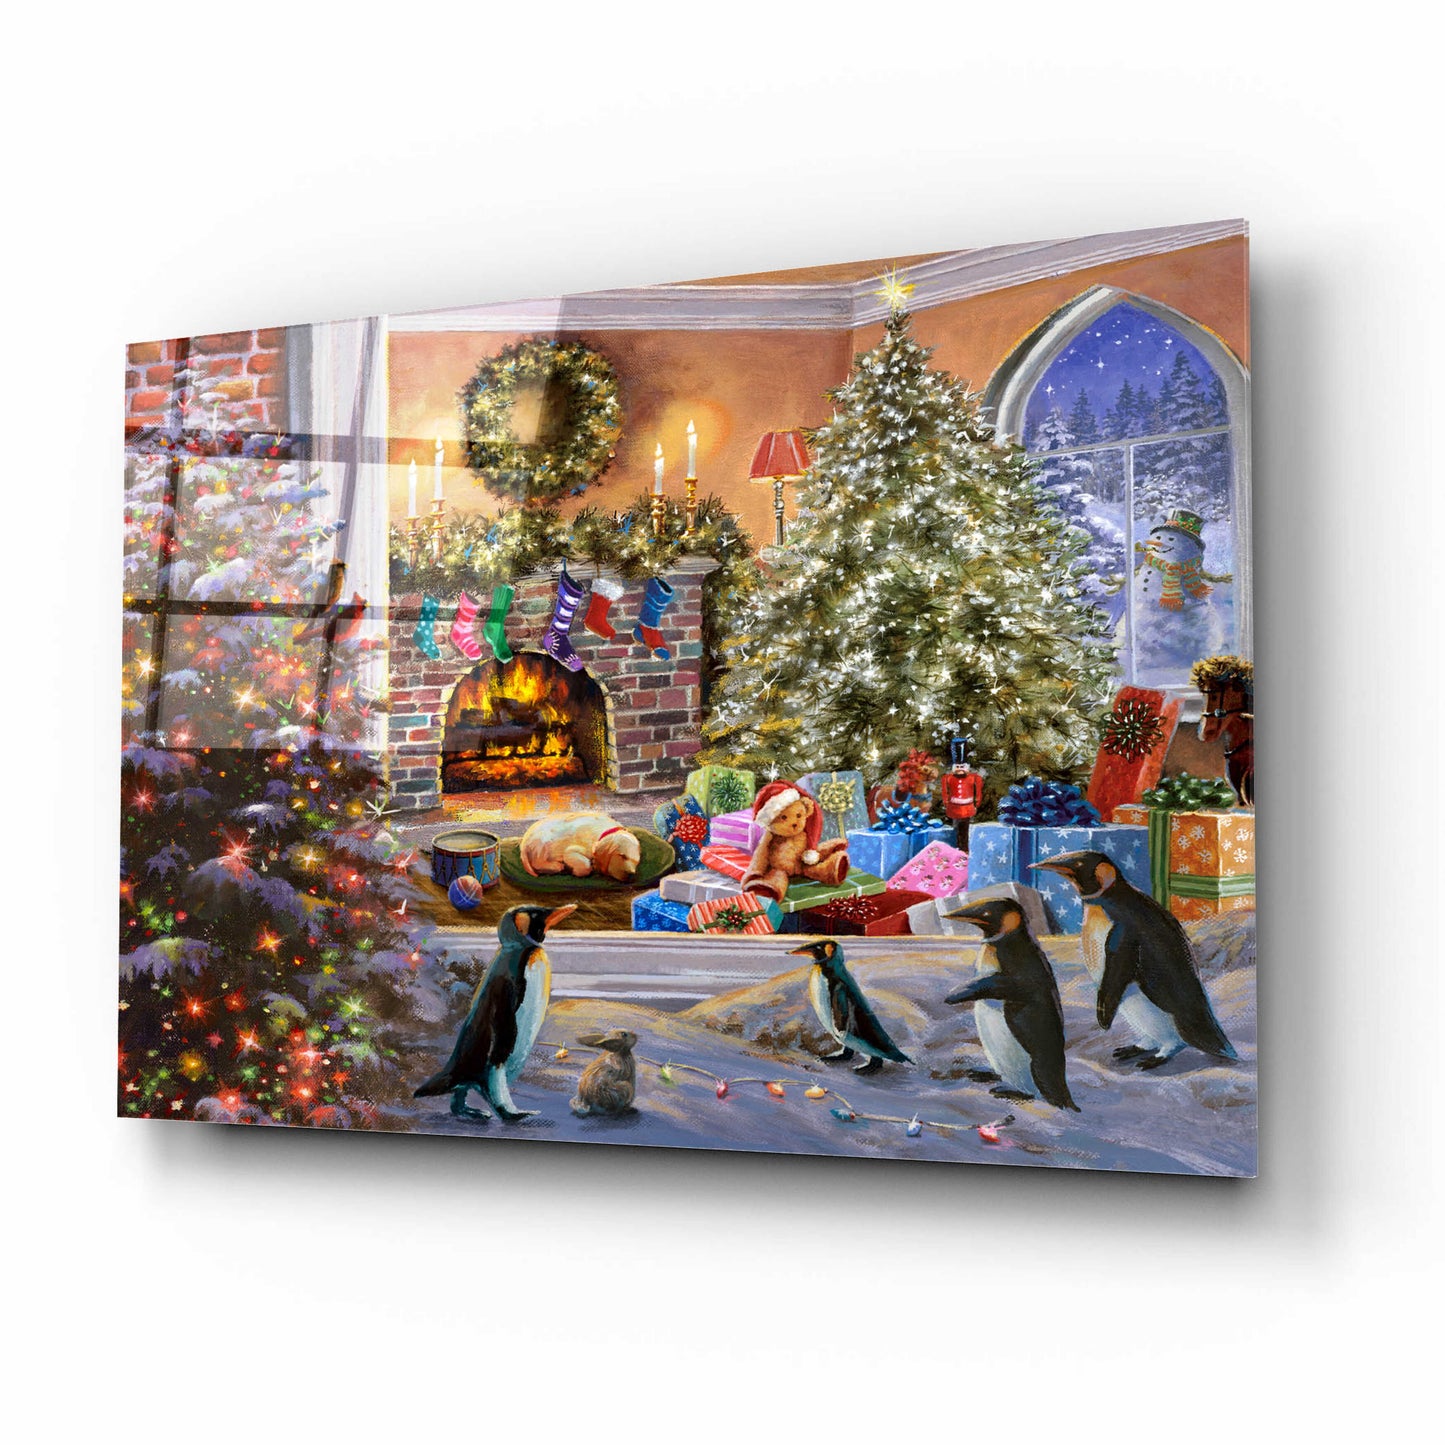 Epic Art 'A Magical View to Christmas' by Nicky Boehme, Acrylic Glass Wall Art,16x12